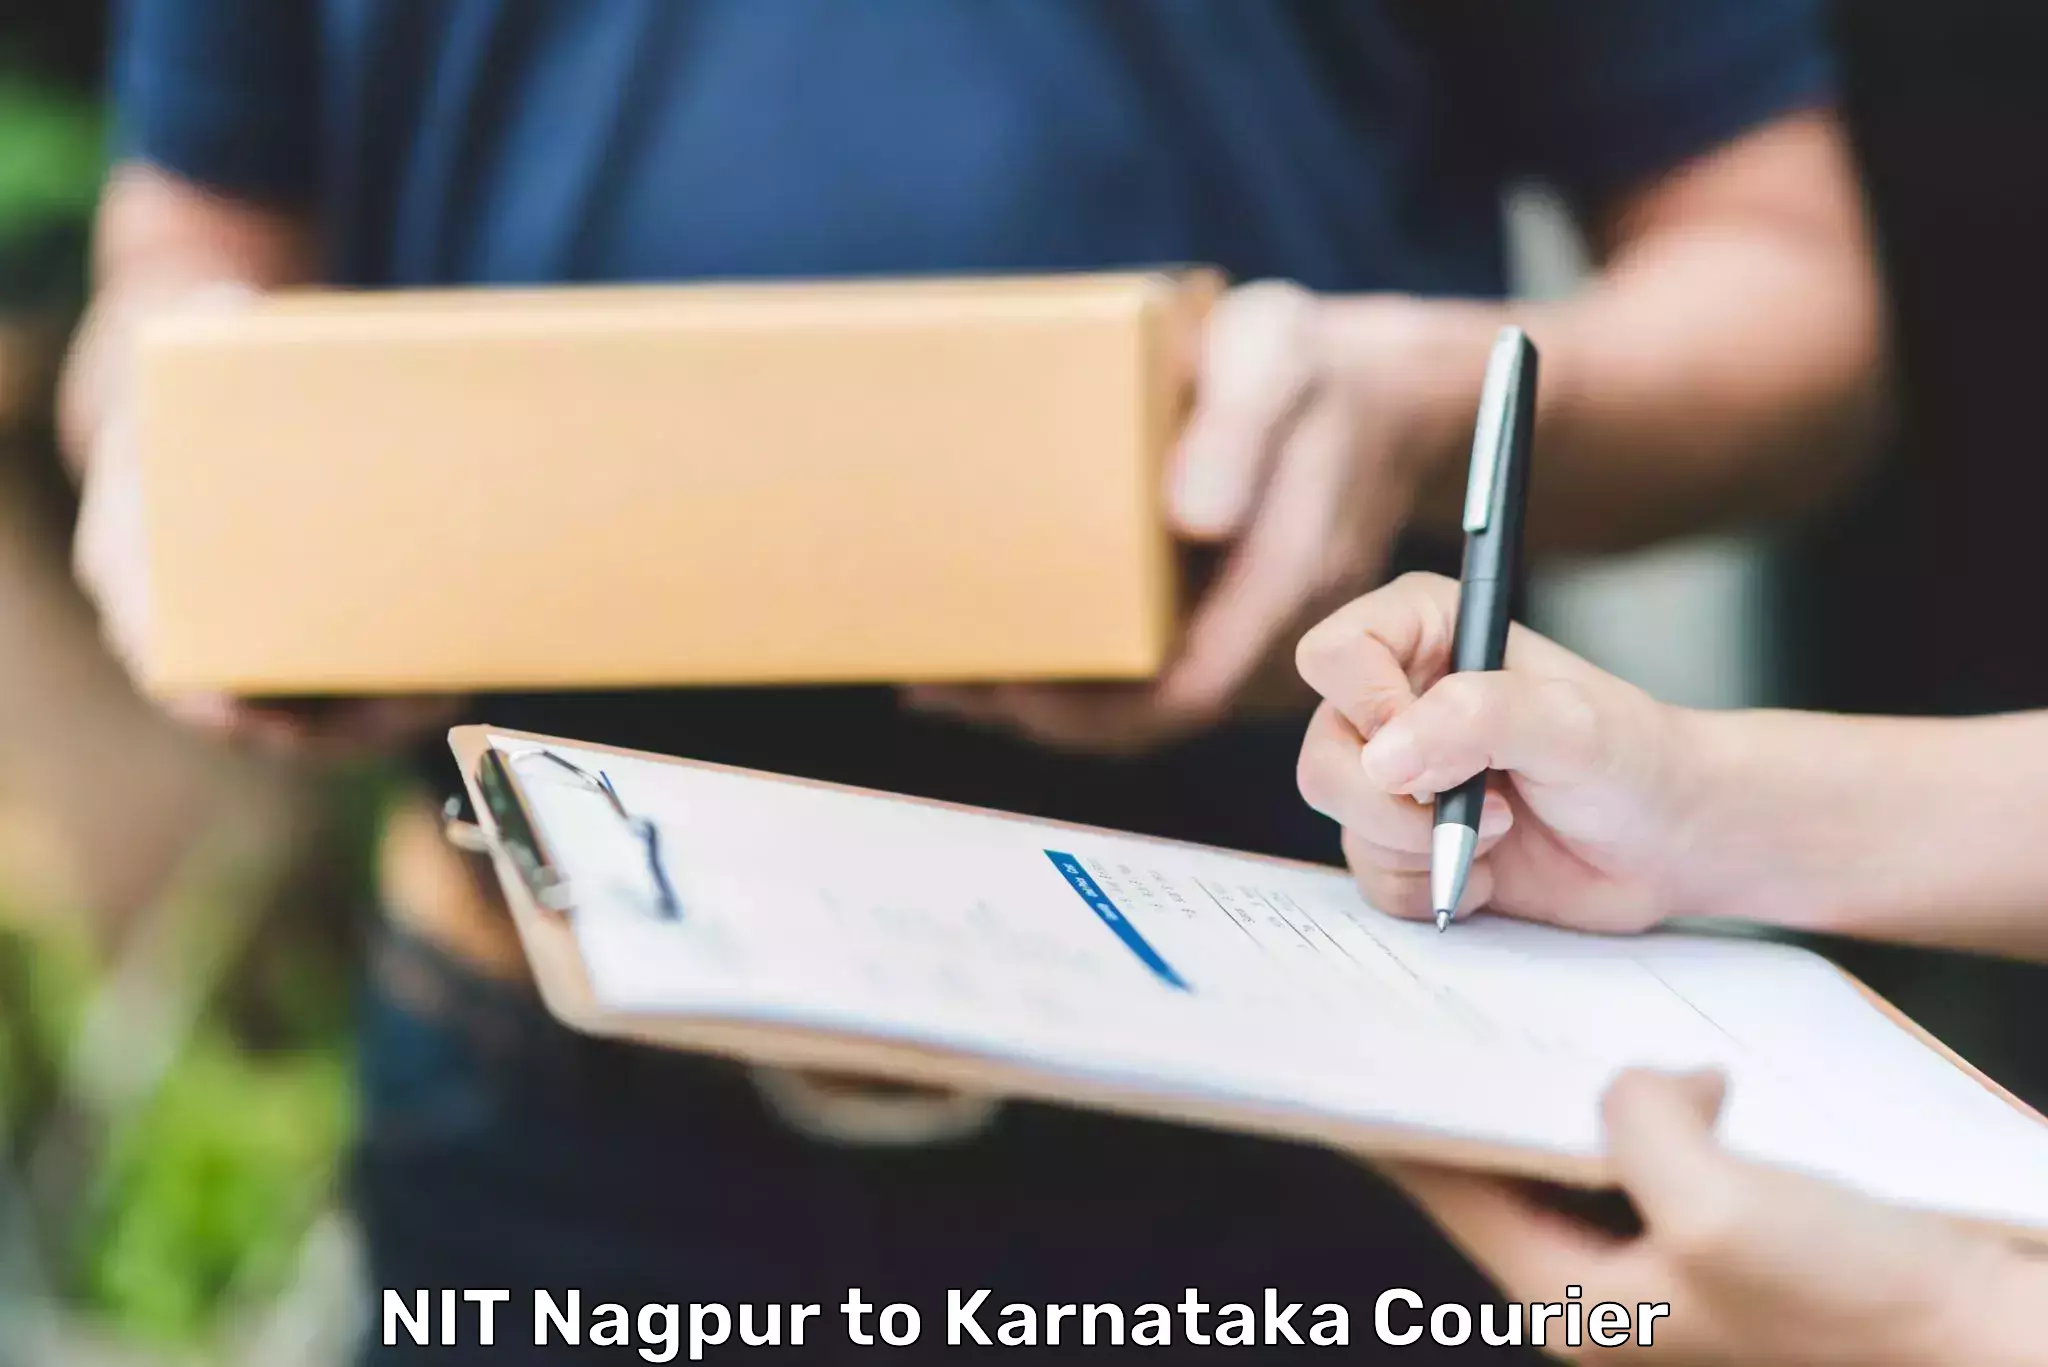 Nationwide delivery network NIT Nagpur to Bagalkot